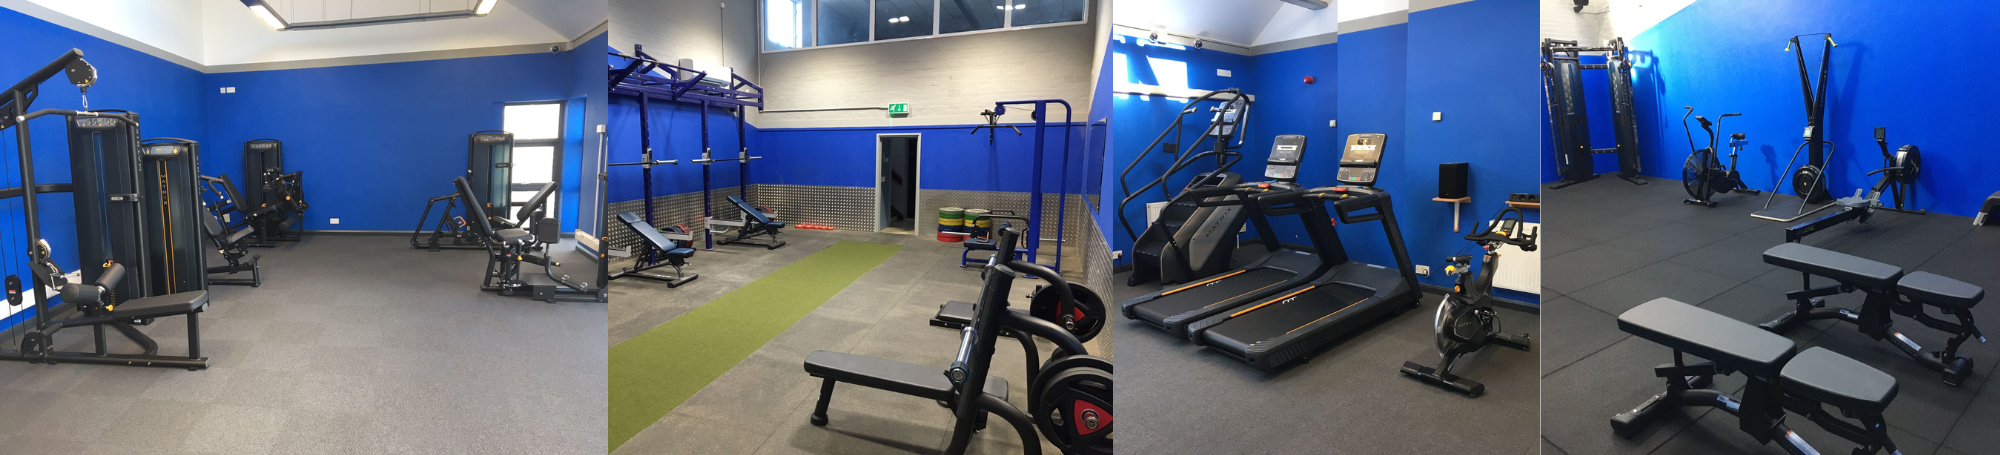 Welcome to our brand new gym! Build muscle, get fit and work on your form with our brand new equipment.